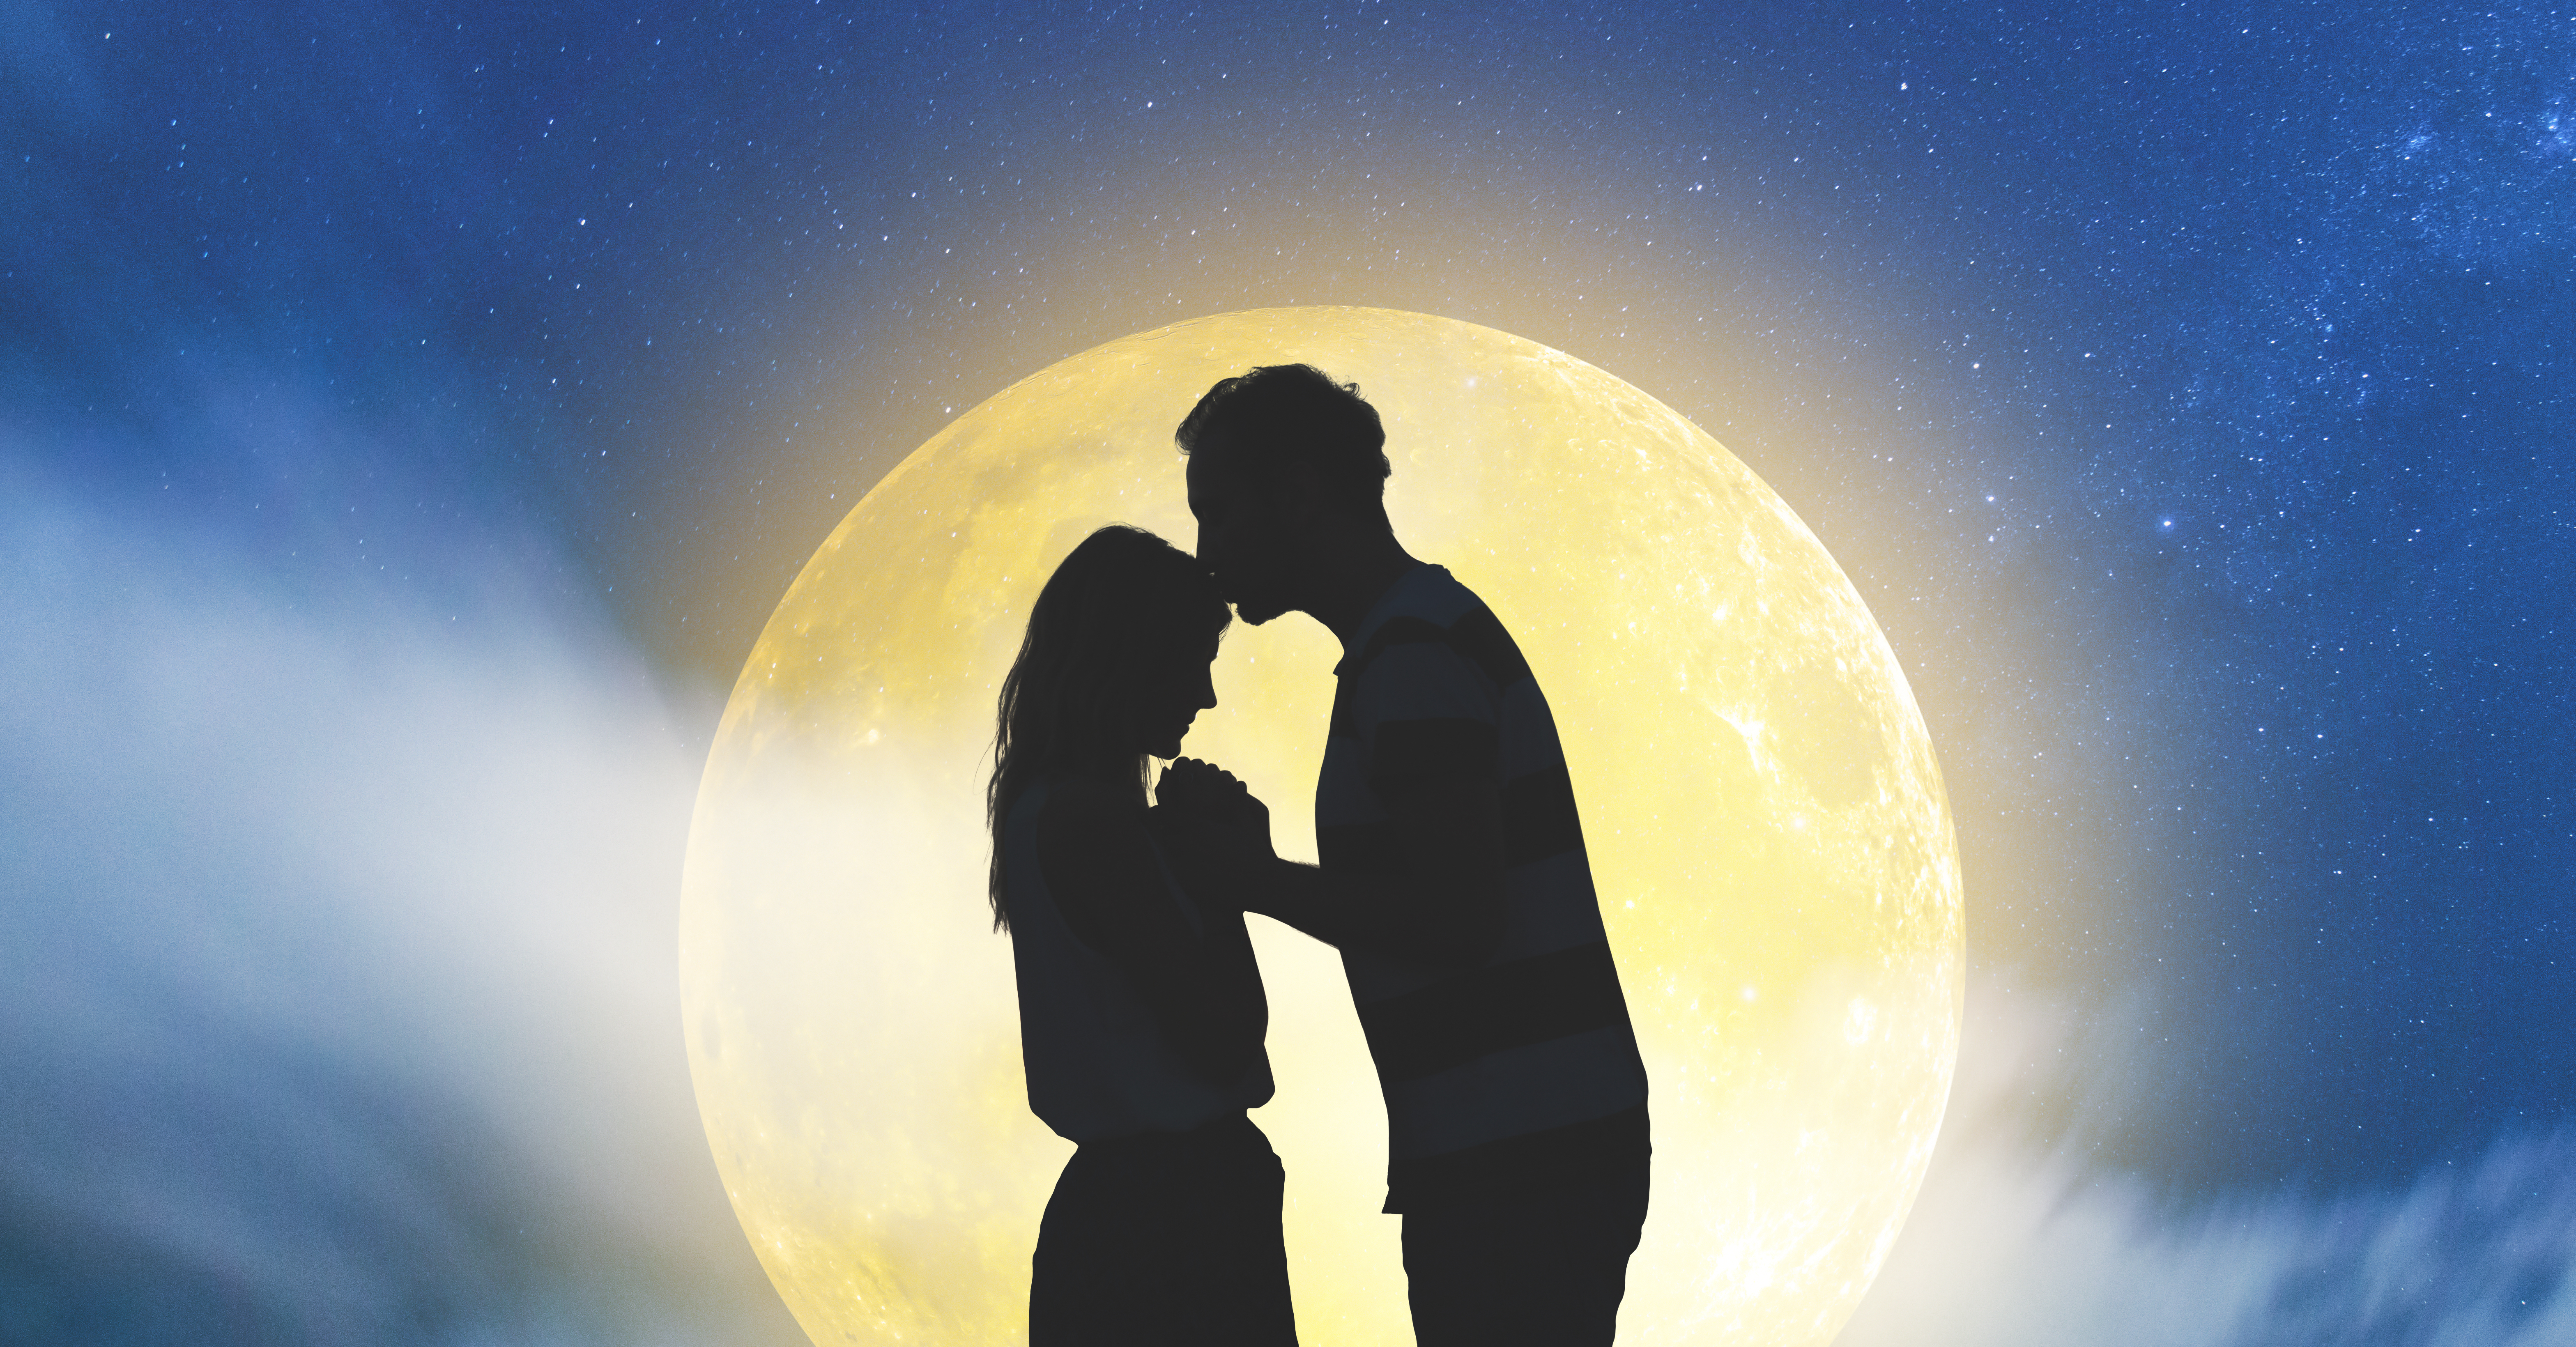 Silhouettes of a young couple under the starry sky with full moon